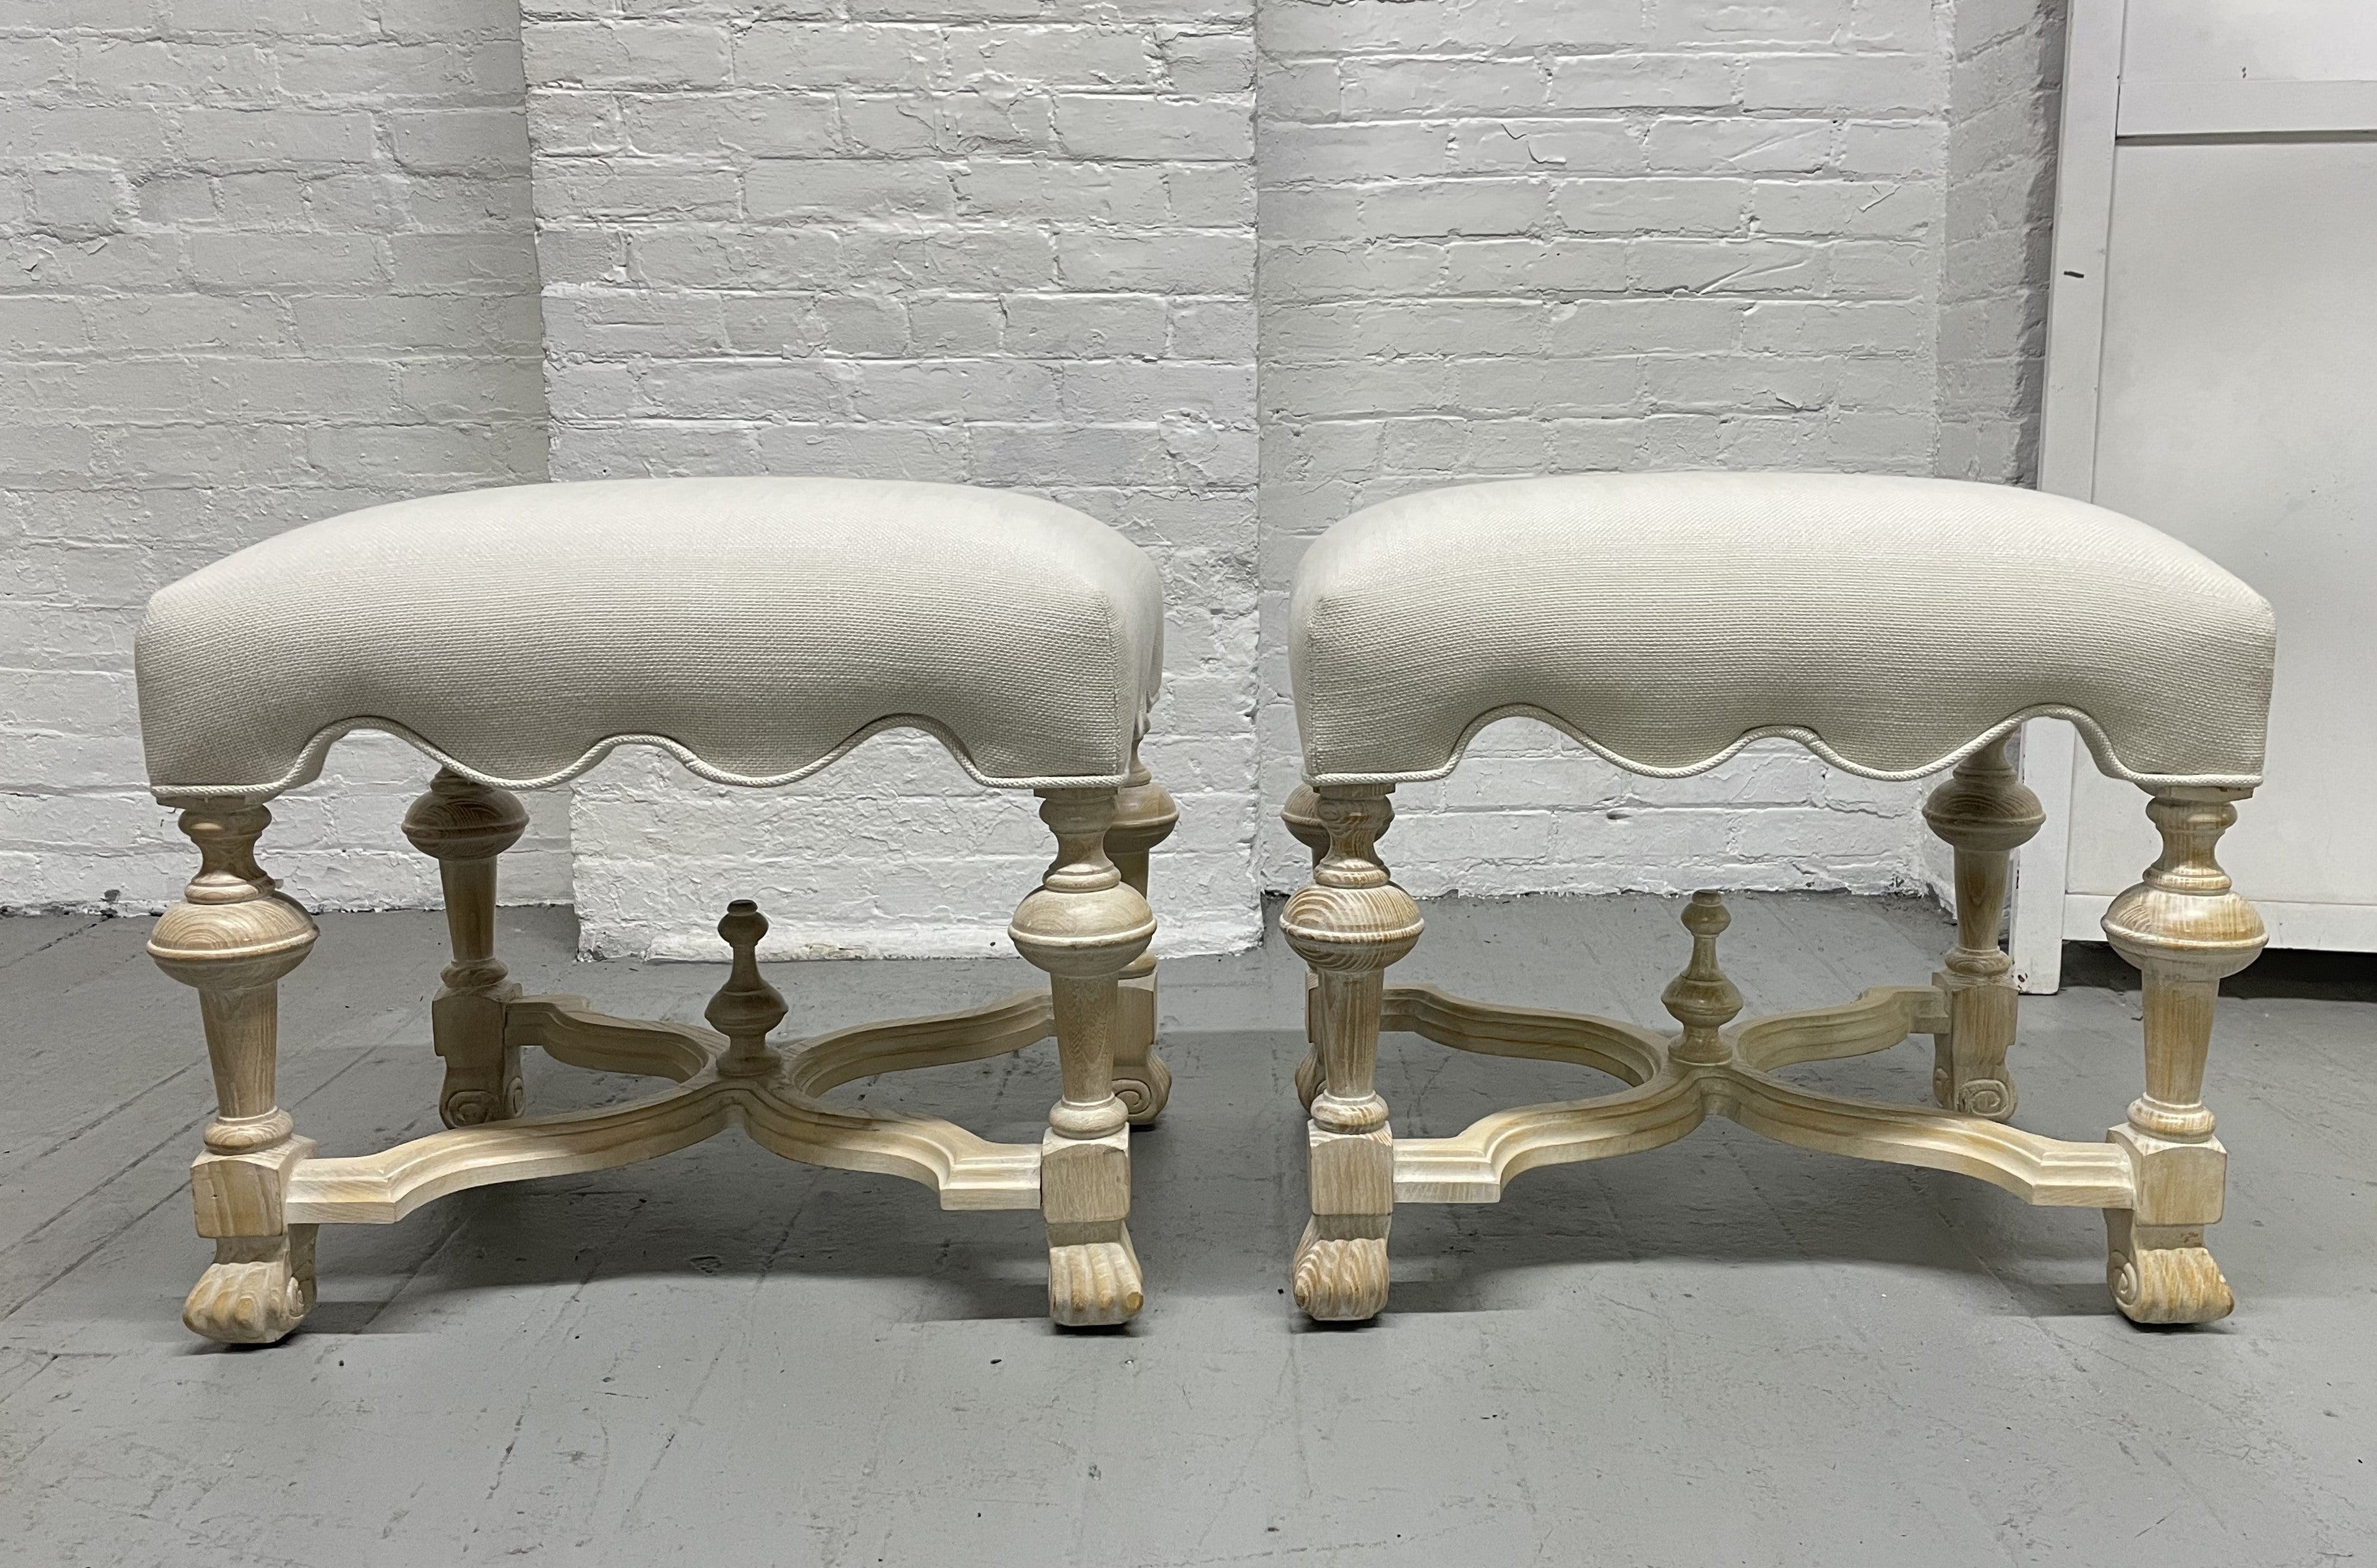 Pair of Hollywood Regency cerused benches. Nicely upholstered cotton-blend fabric.